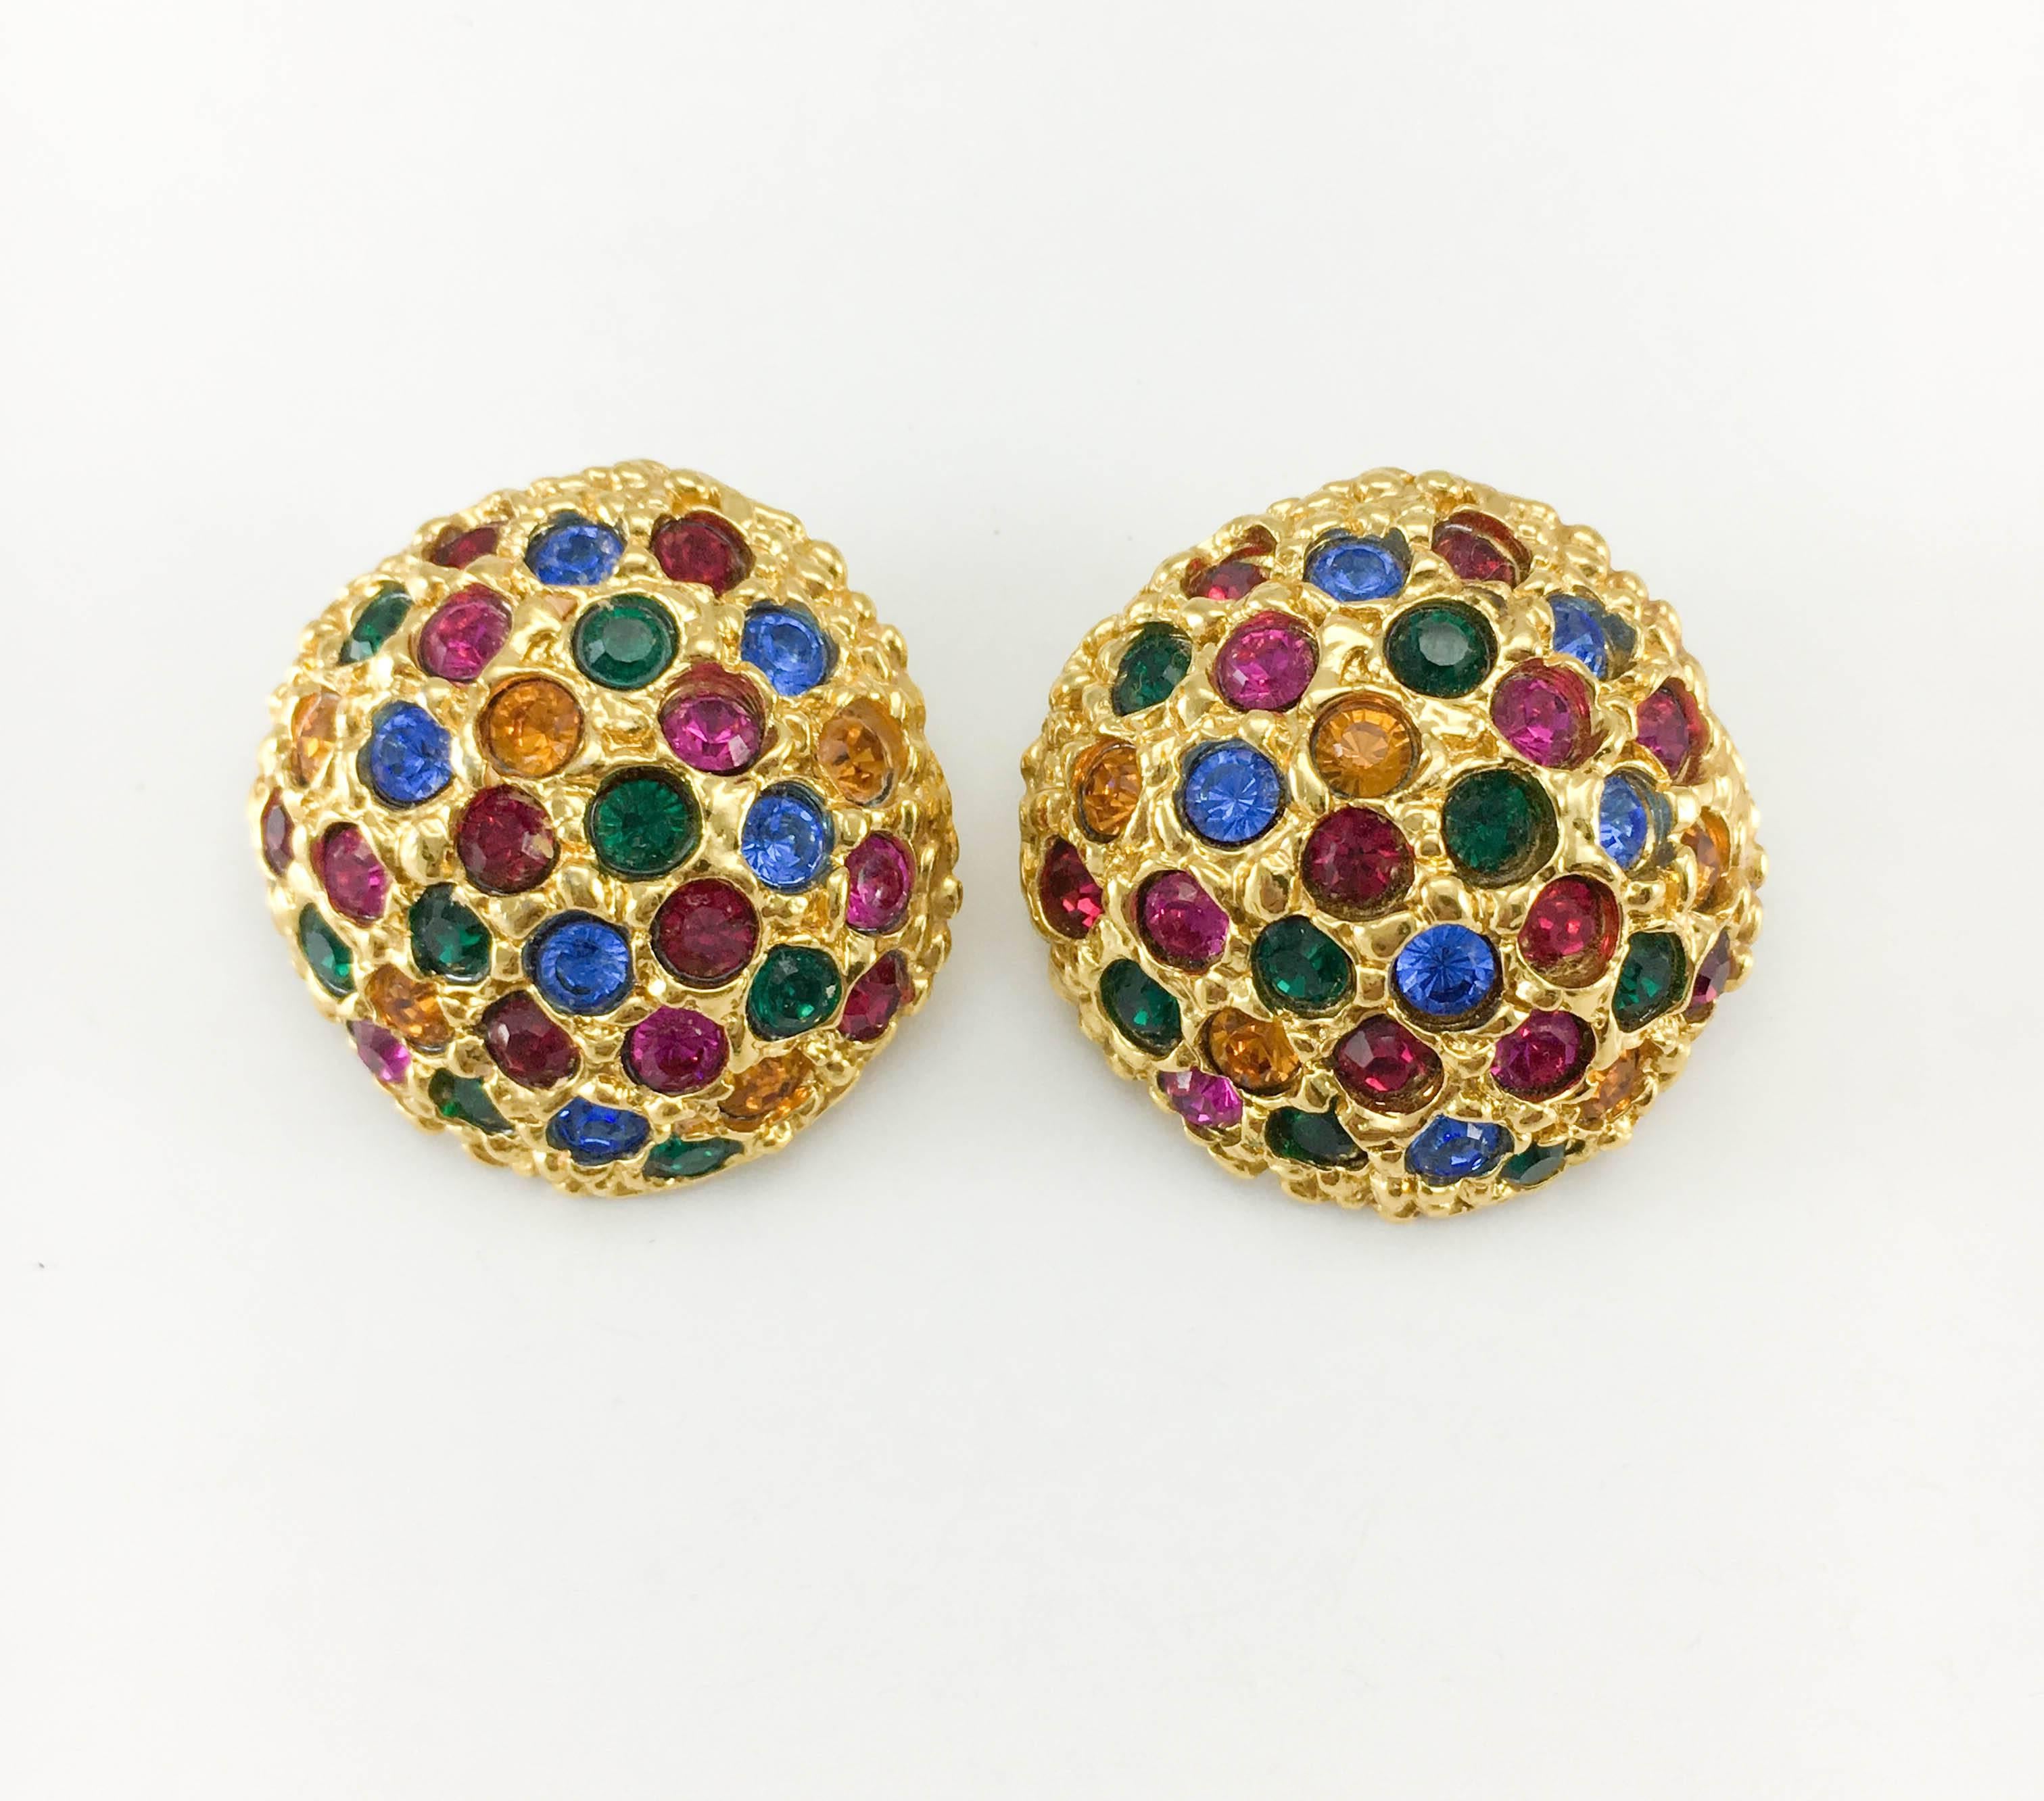 Women's 1980s Yves Saint Laurent Colourful Crystal Embellished Gold-Plated Earrings